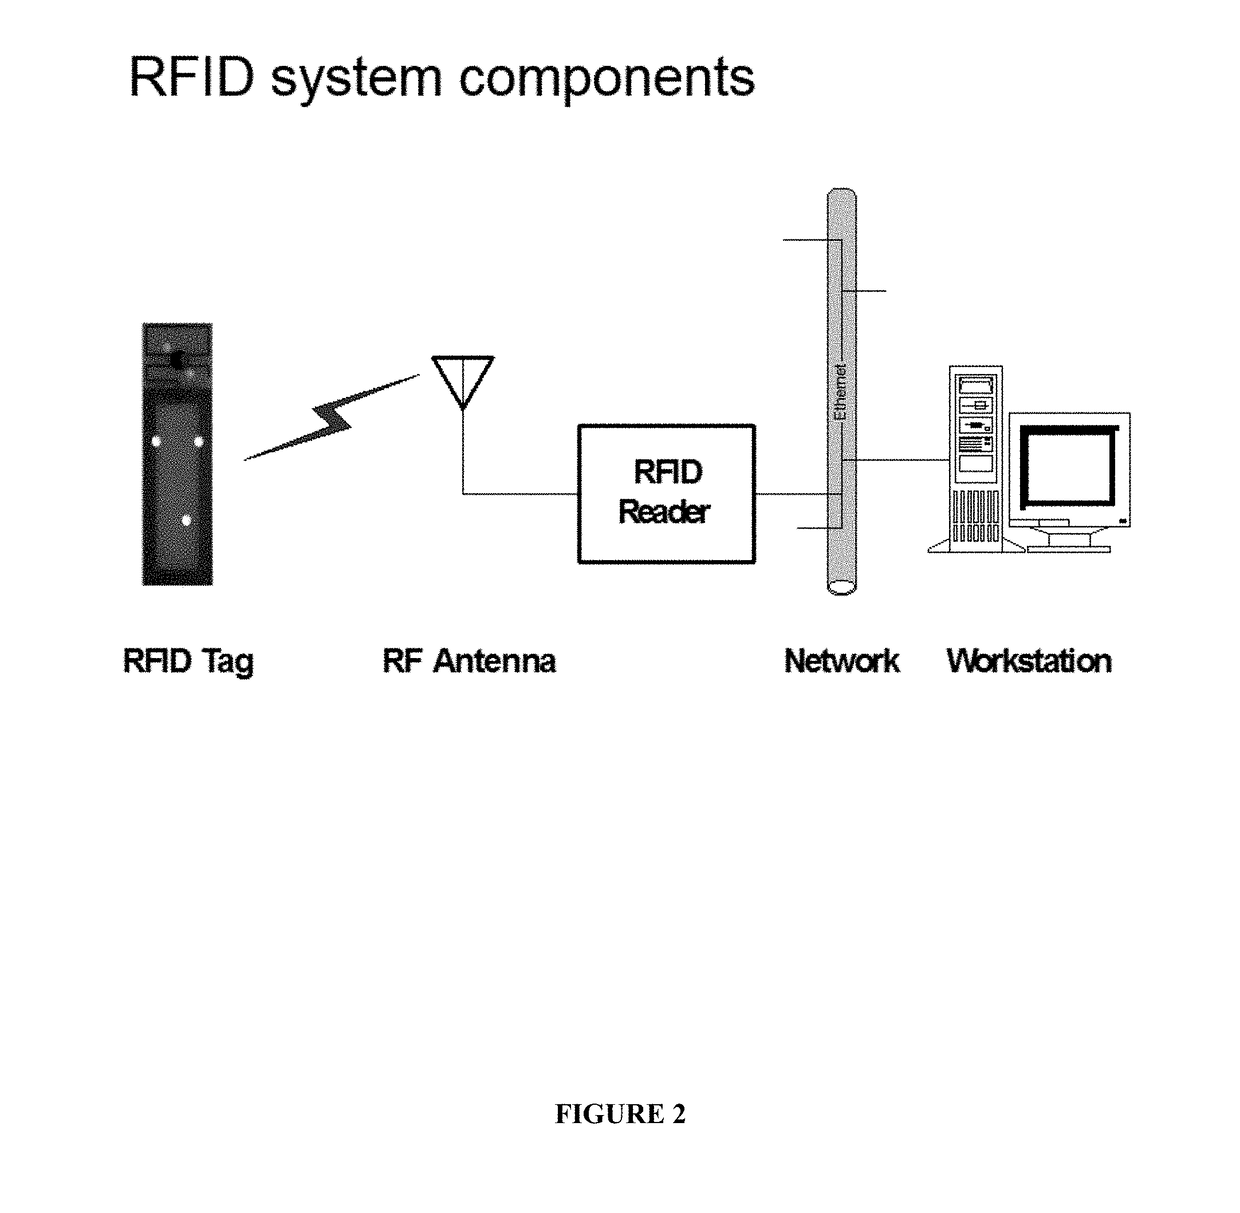 Systems, computer media, and methods for using electromagnetic frequency (EMF) identification (ID) devices for monitoring, collection, analysis, use and tracking of personal data, biometric data, medical data, transaction data, electronic payment data, and location data for one or more end user, pet, livestock, dairy cows, cattle or other animals, including use of unmanned surveillance vehicles, satellites or hand-held devices